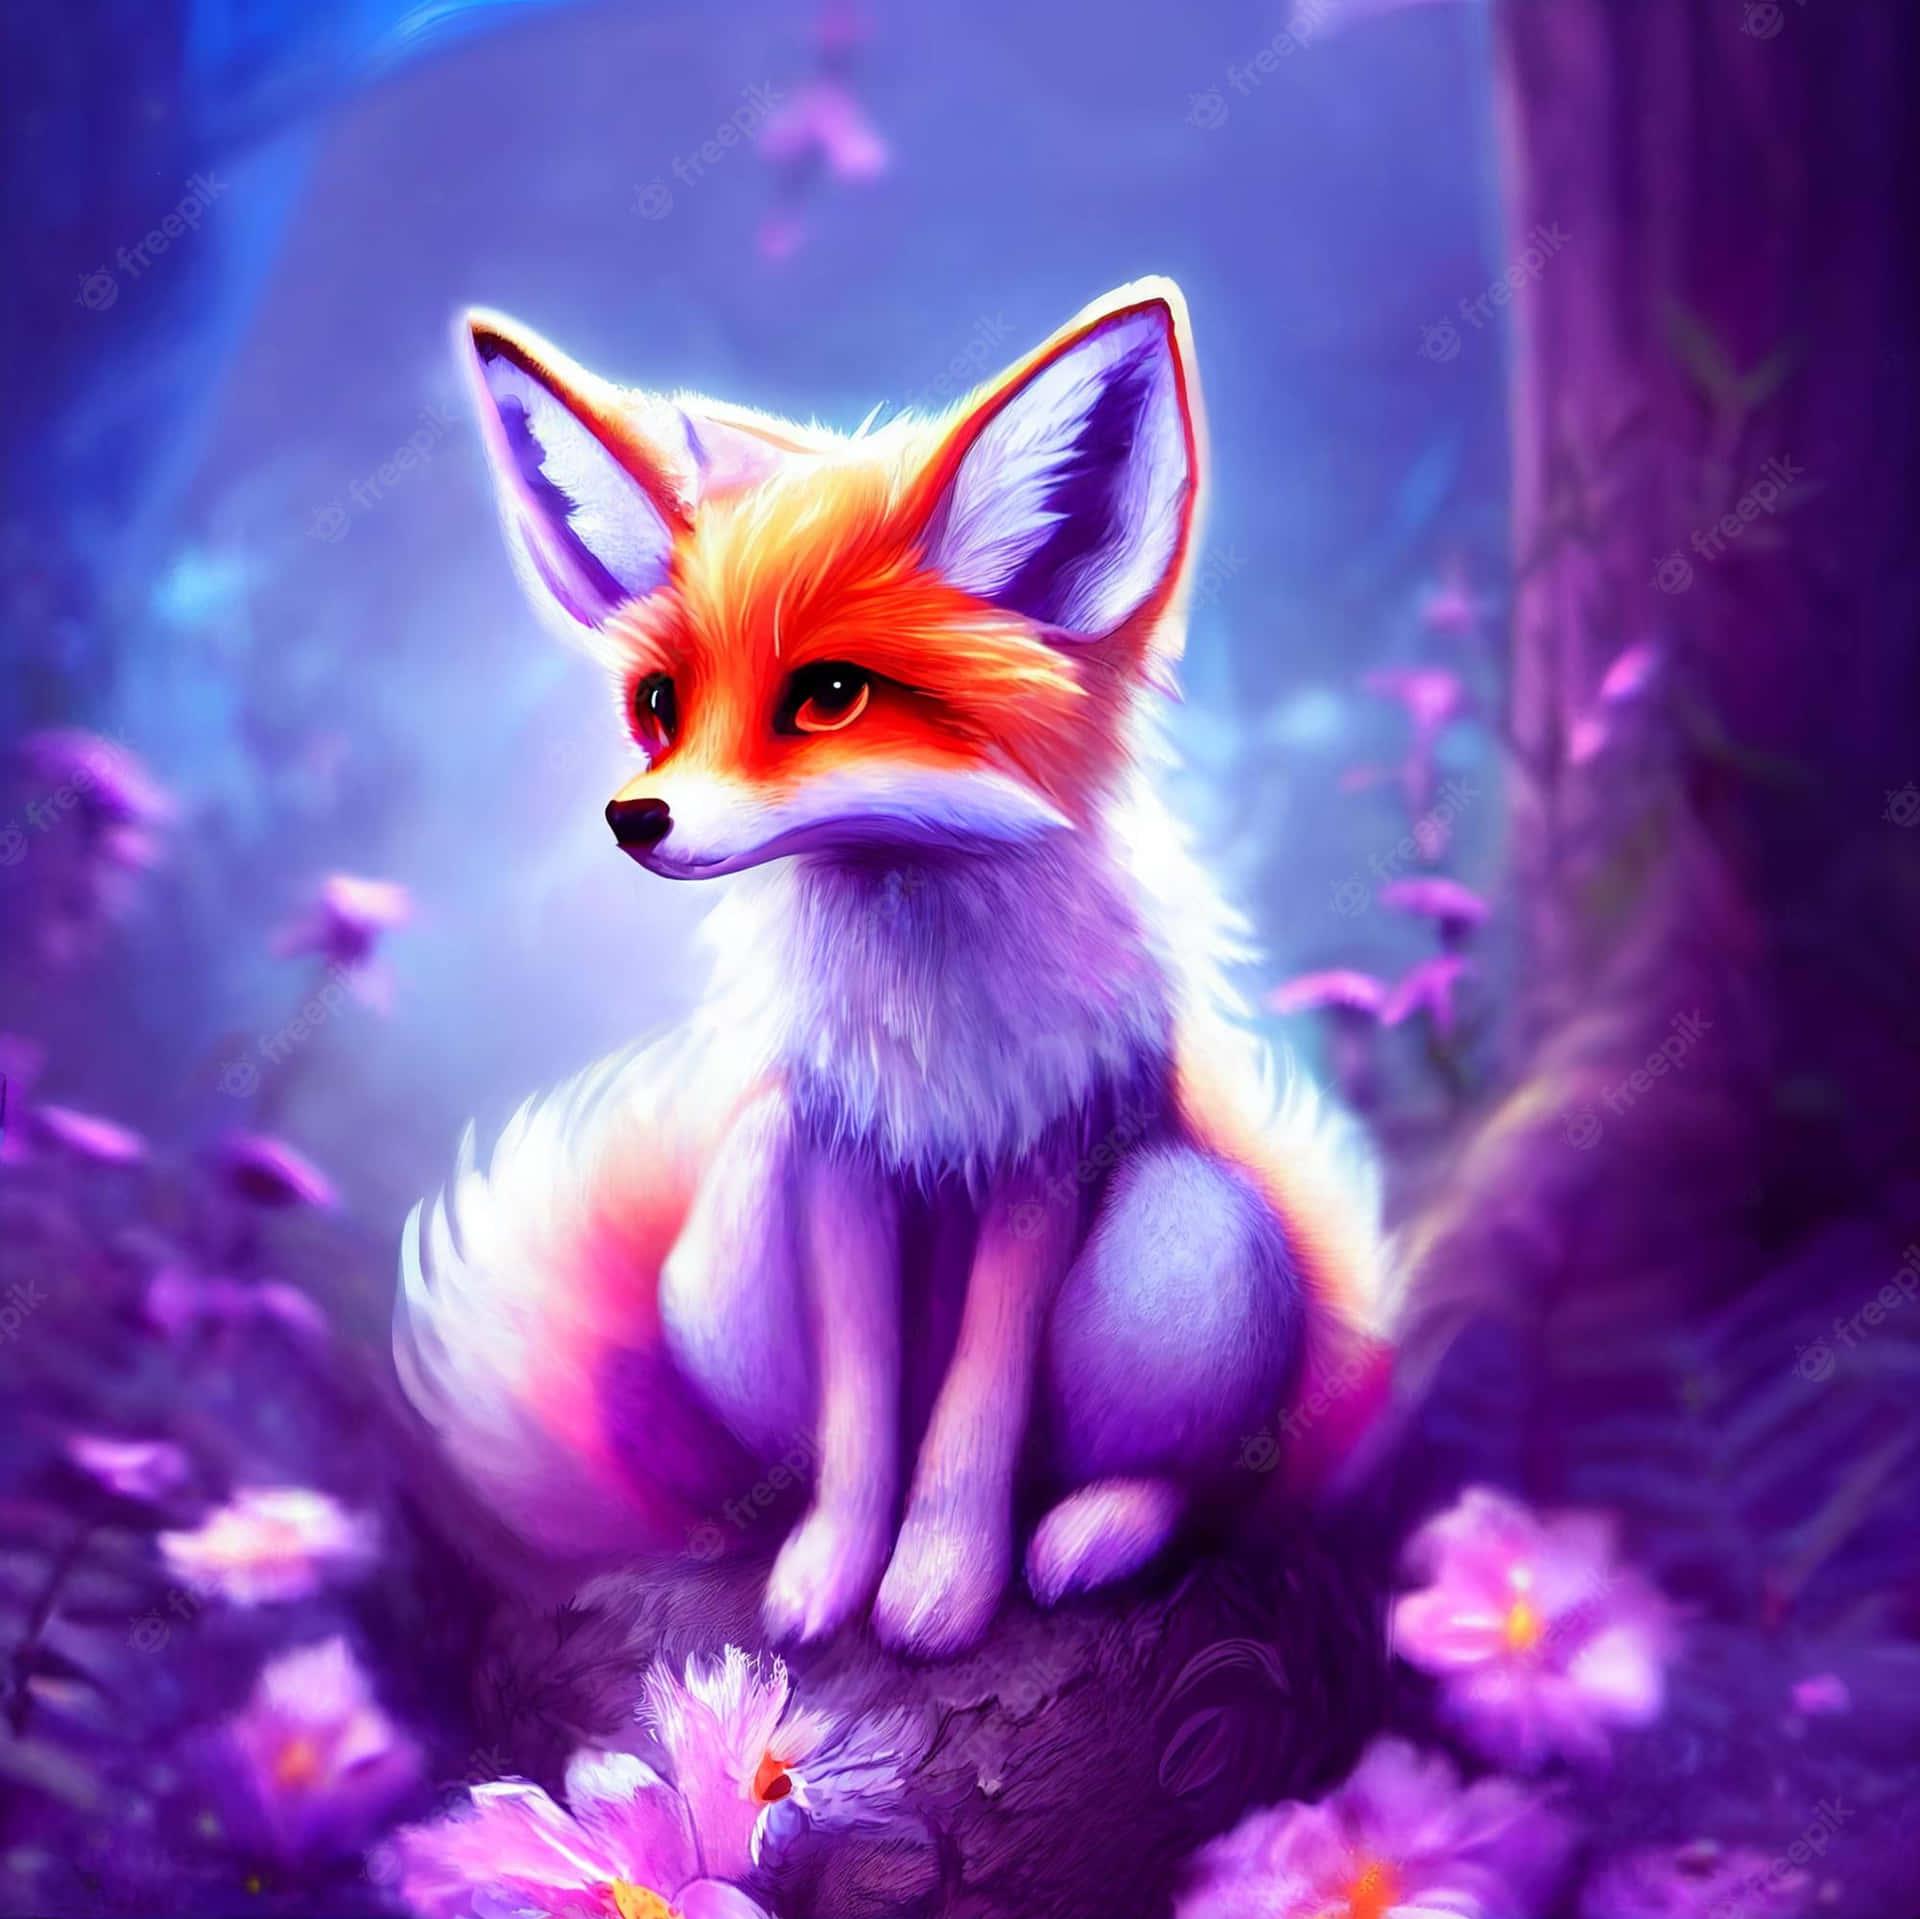 This Adorable Fox Is Just Another Reminder Of The Beauty